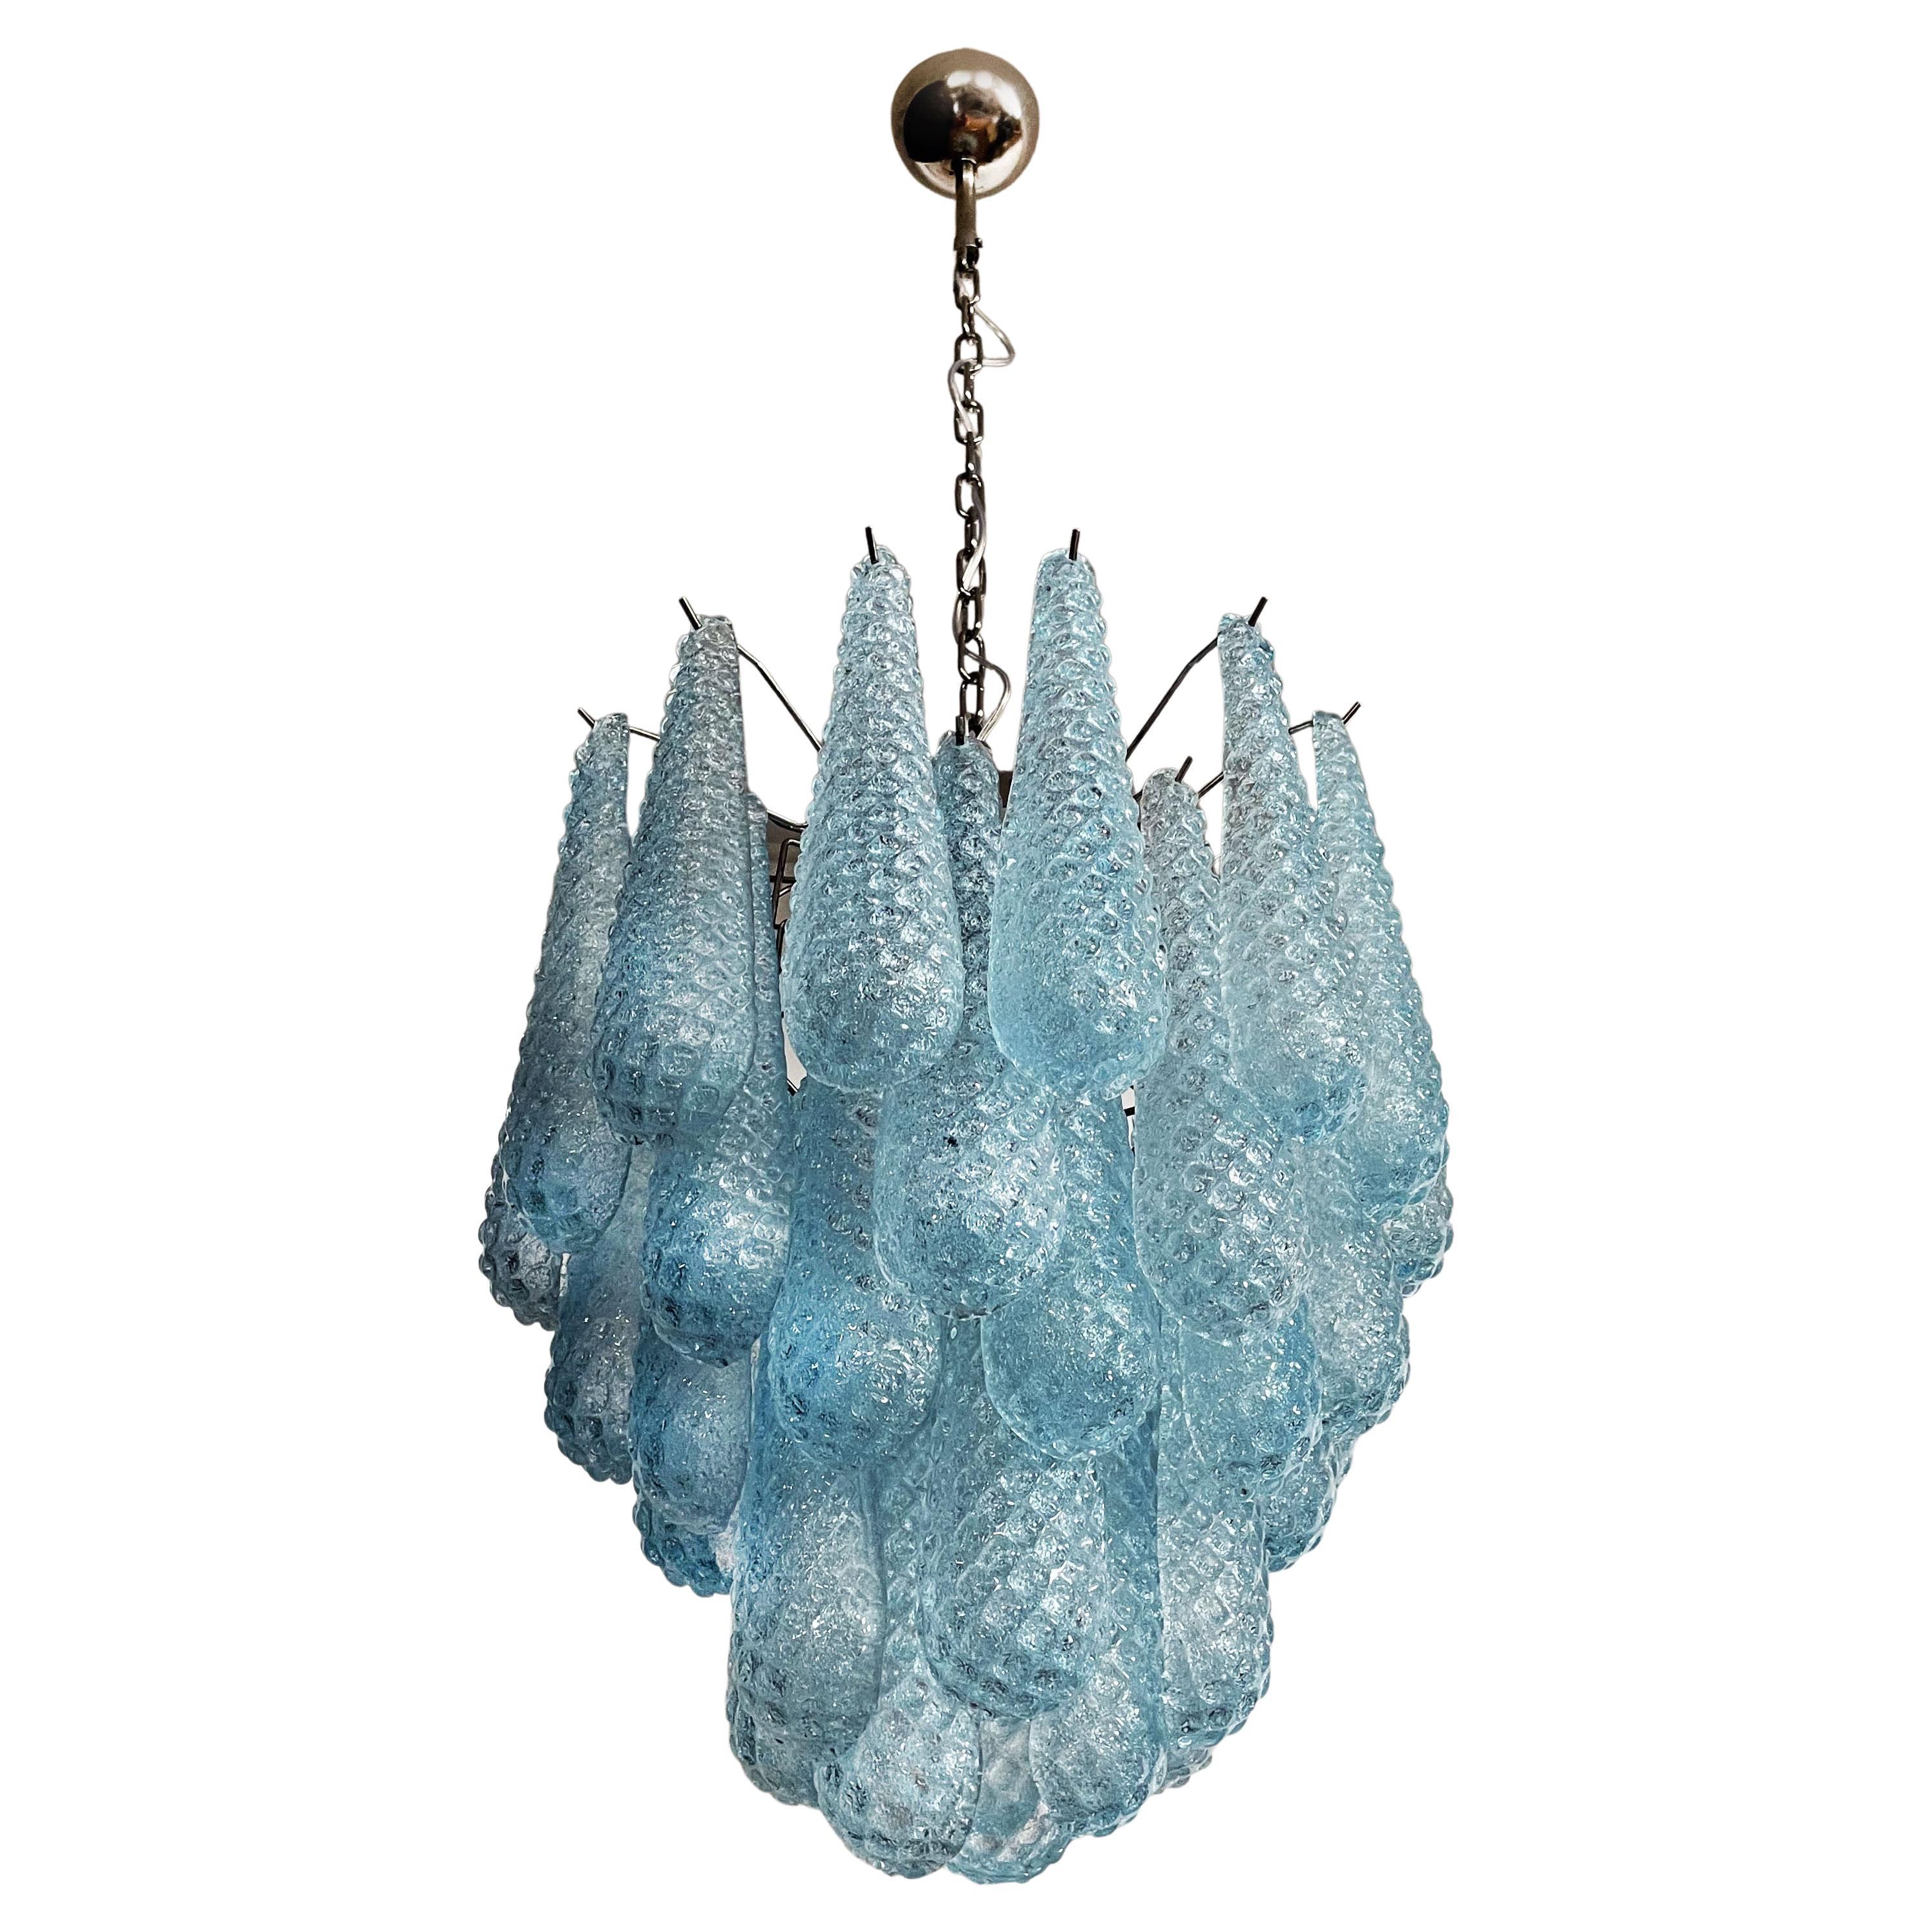 Fascinating Pair of Italian Murano Glass Chandeliers For Sale 2